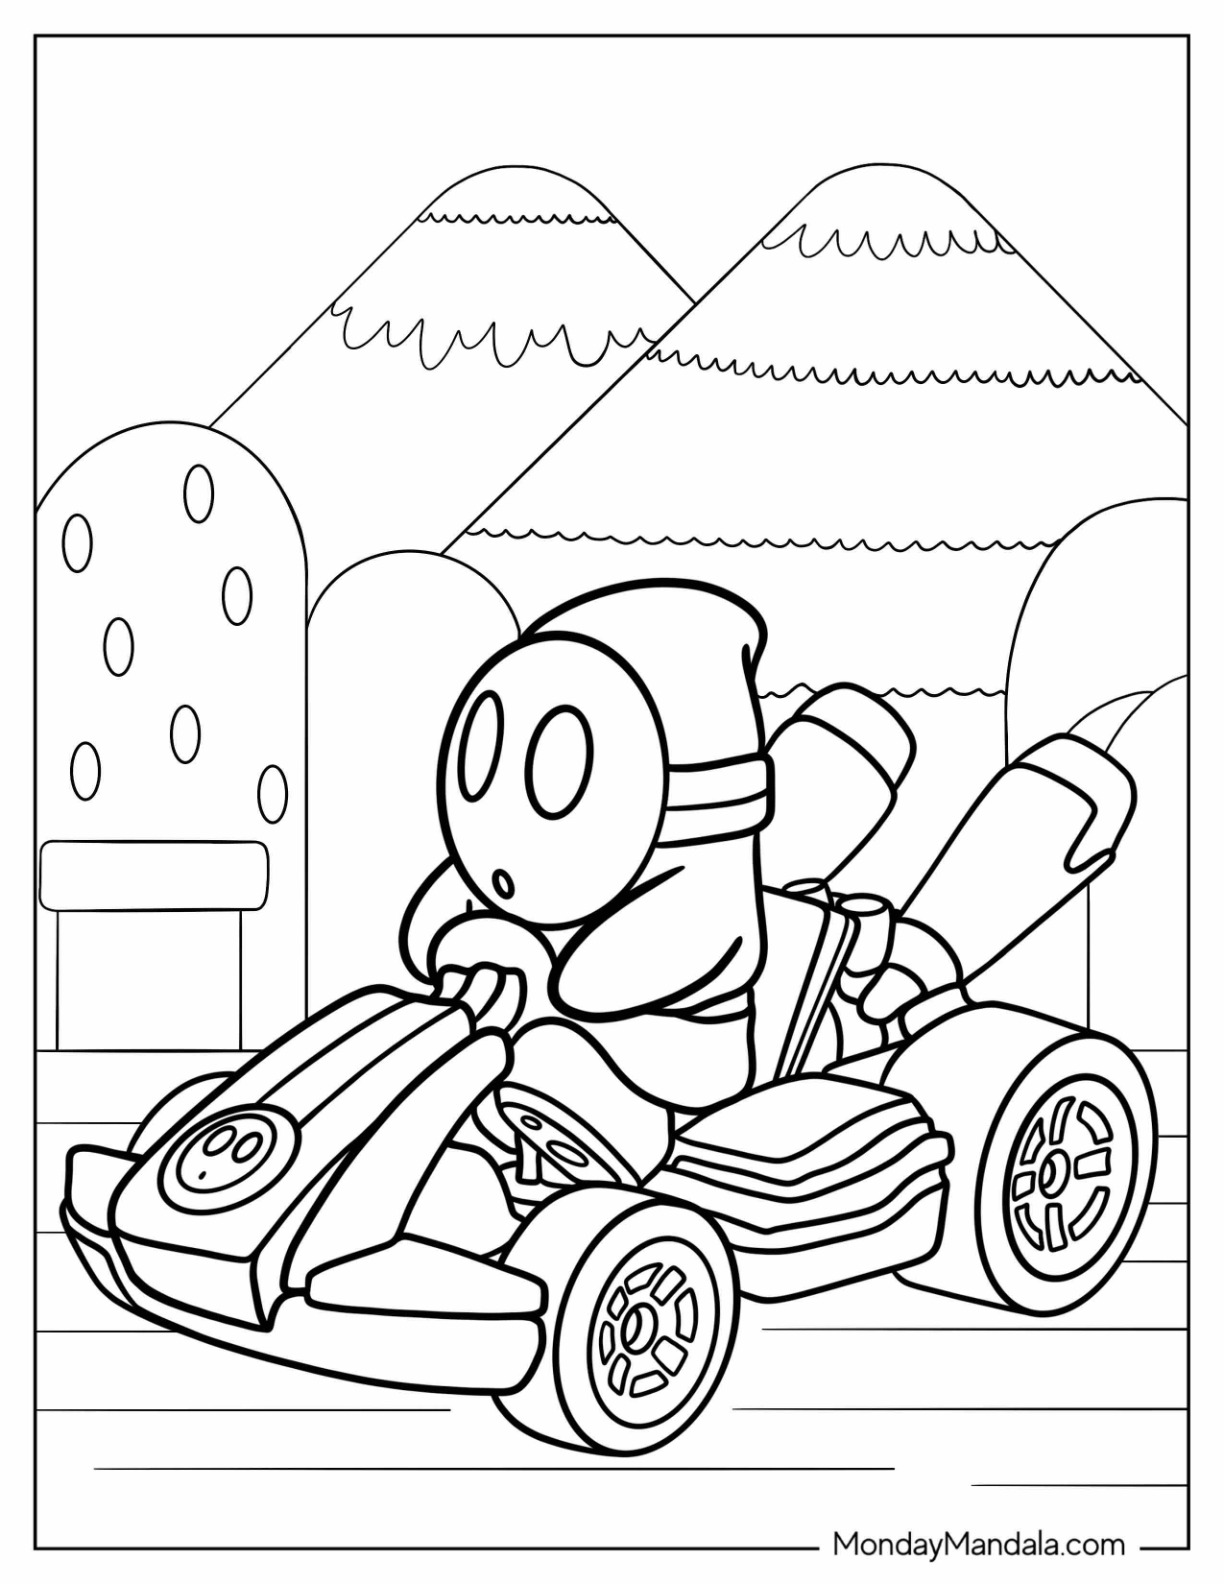 Shy guy coloring pages free pdf printables